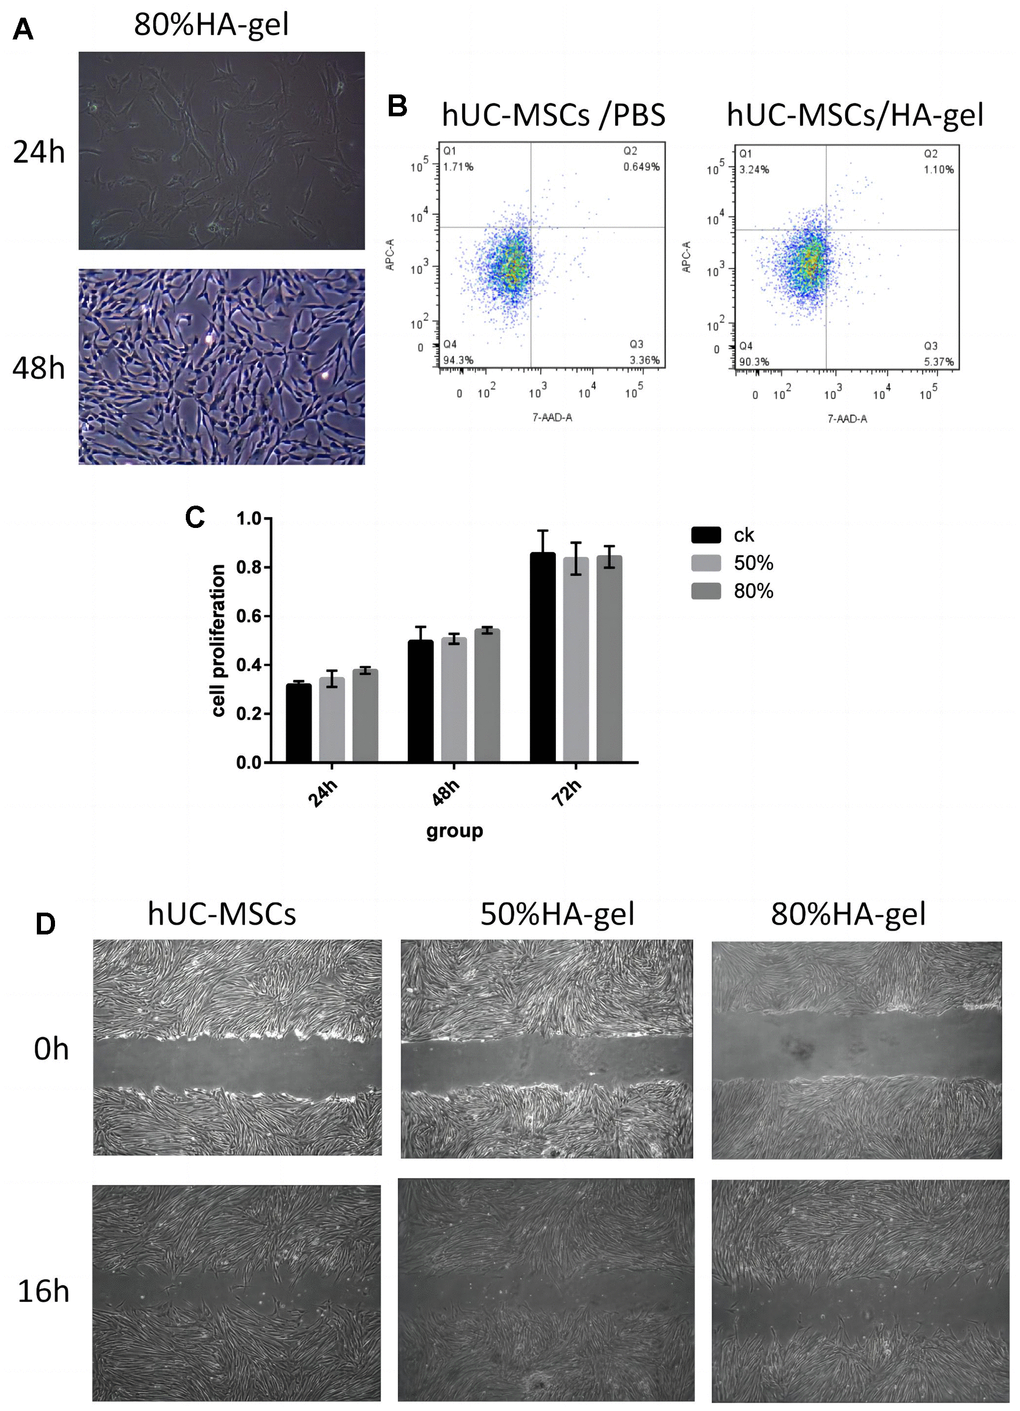 Safety assessment and verification of hUC-MSCs on an autocrosslinked HA-gel. (A) The influence of HA-gel on the morphology and adhesion of hUC-MSCs; (B) The influence of HA-gel on apoptosis of hUC-MSCs by FACS; (C) The effect of HA-gel on the proliferation ability of hUC-MSCs evaluated using CCK-8 assay; (D) The effect of HA-gel on the migration ability of hUC-MSCs evaluated by scratch assay.